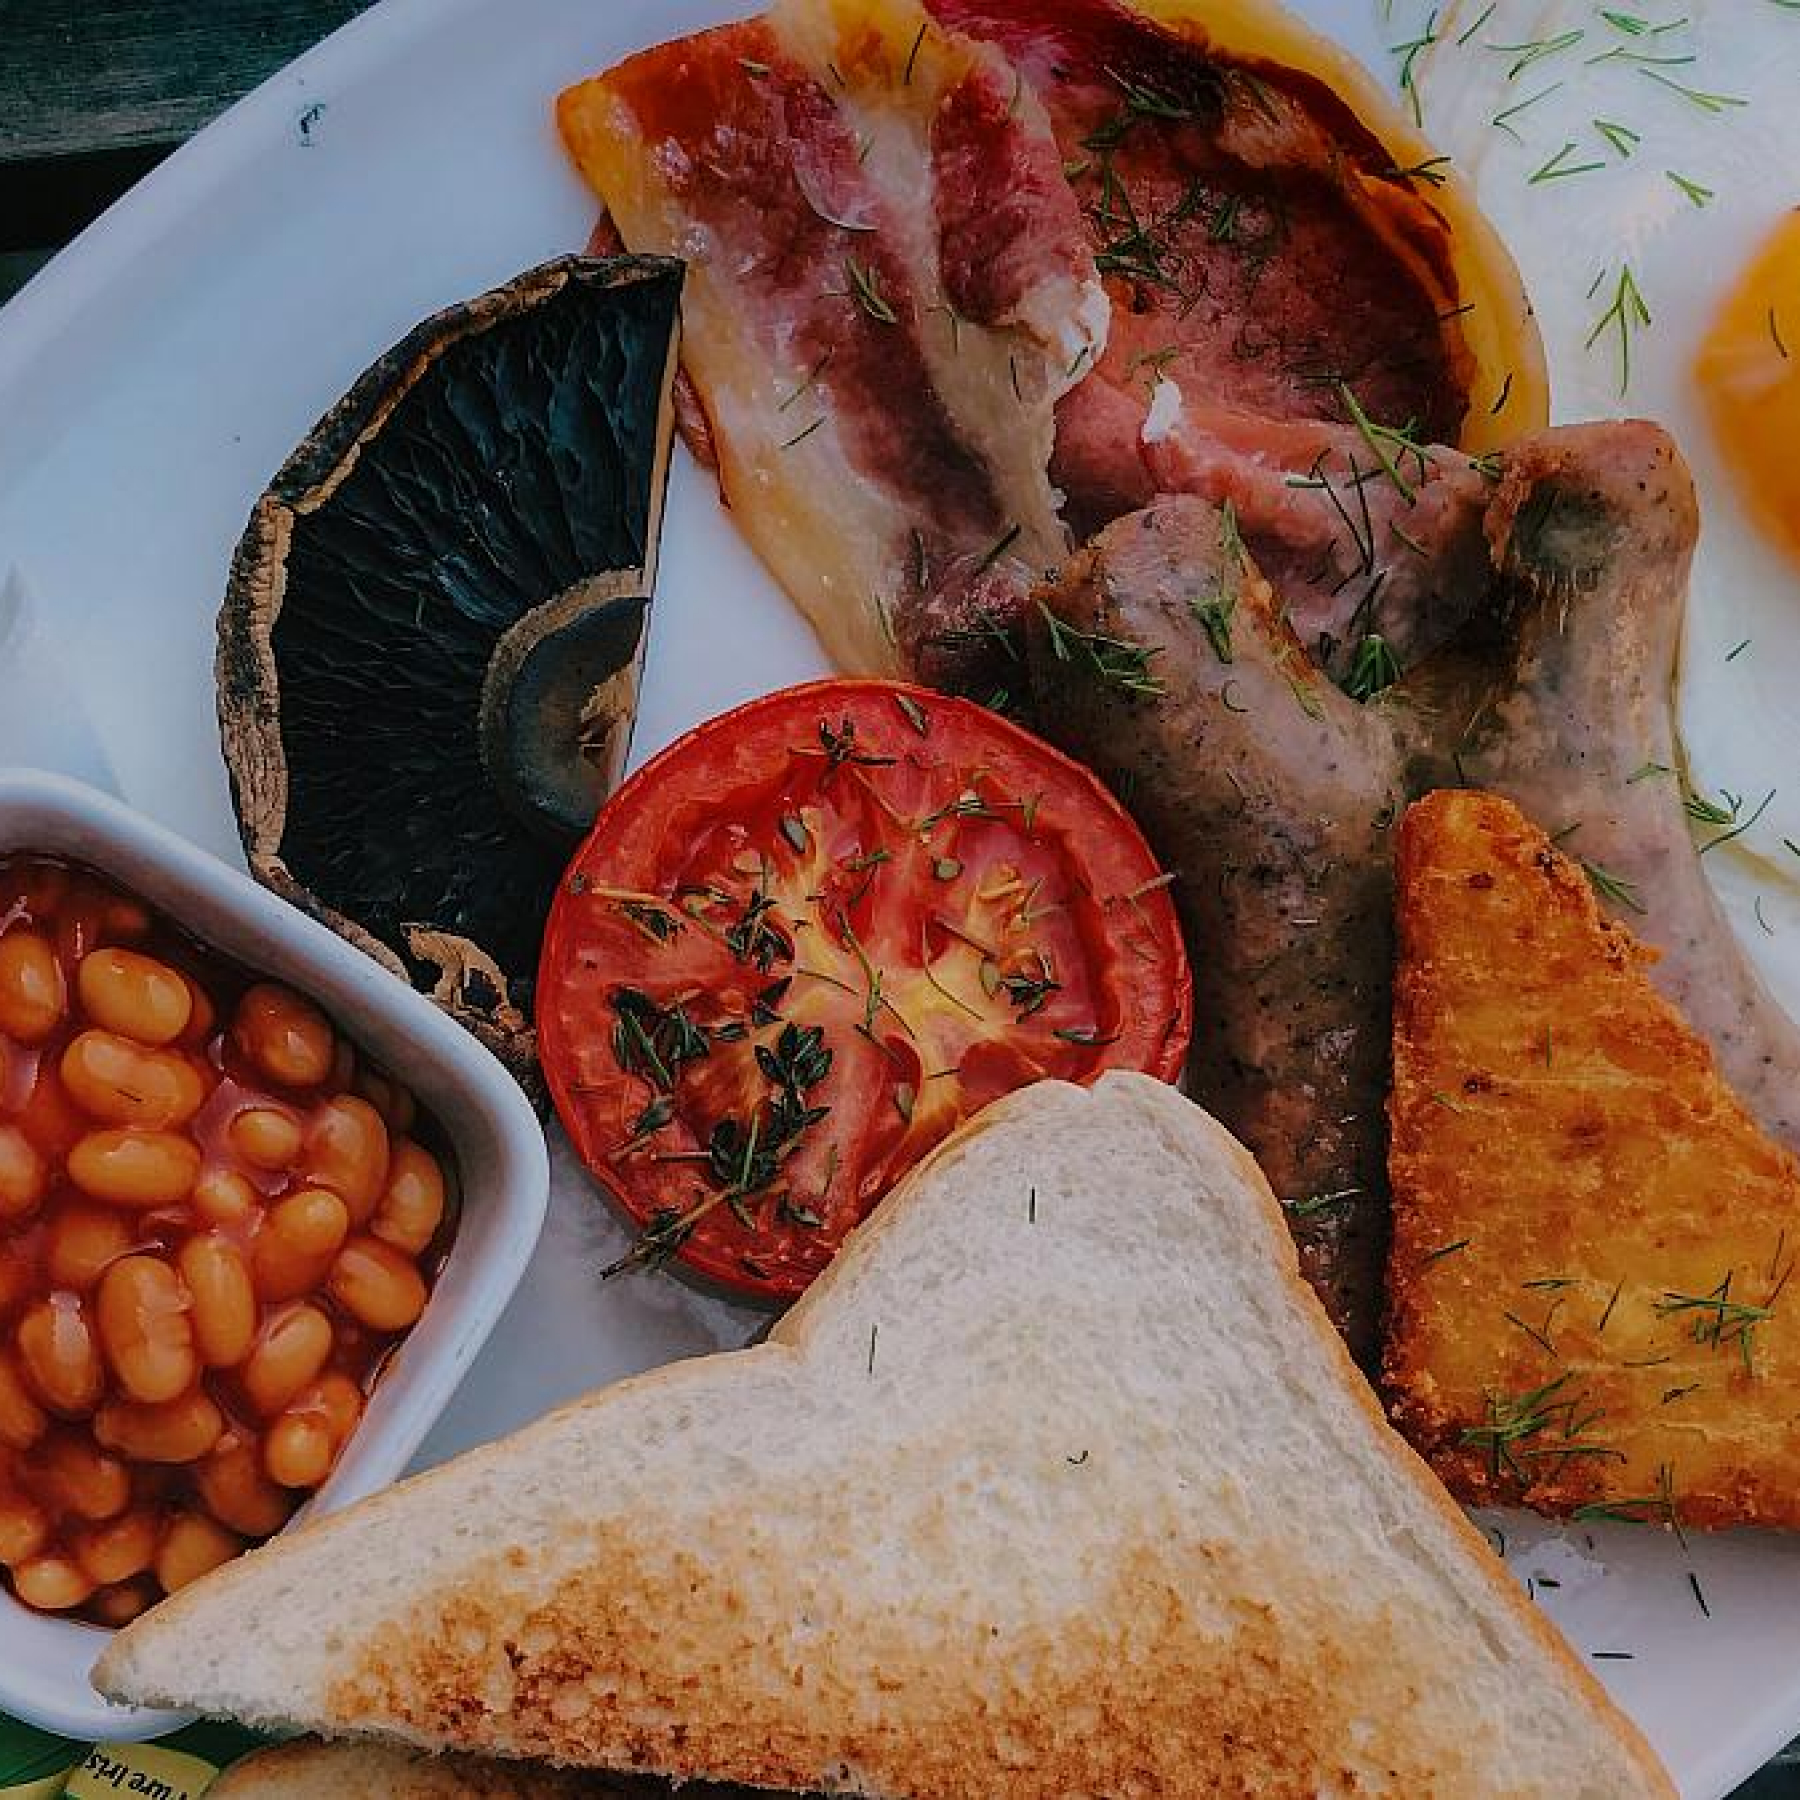 UKs largest hotel chain adds plant-based bacon to its breakfast buffet